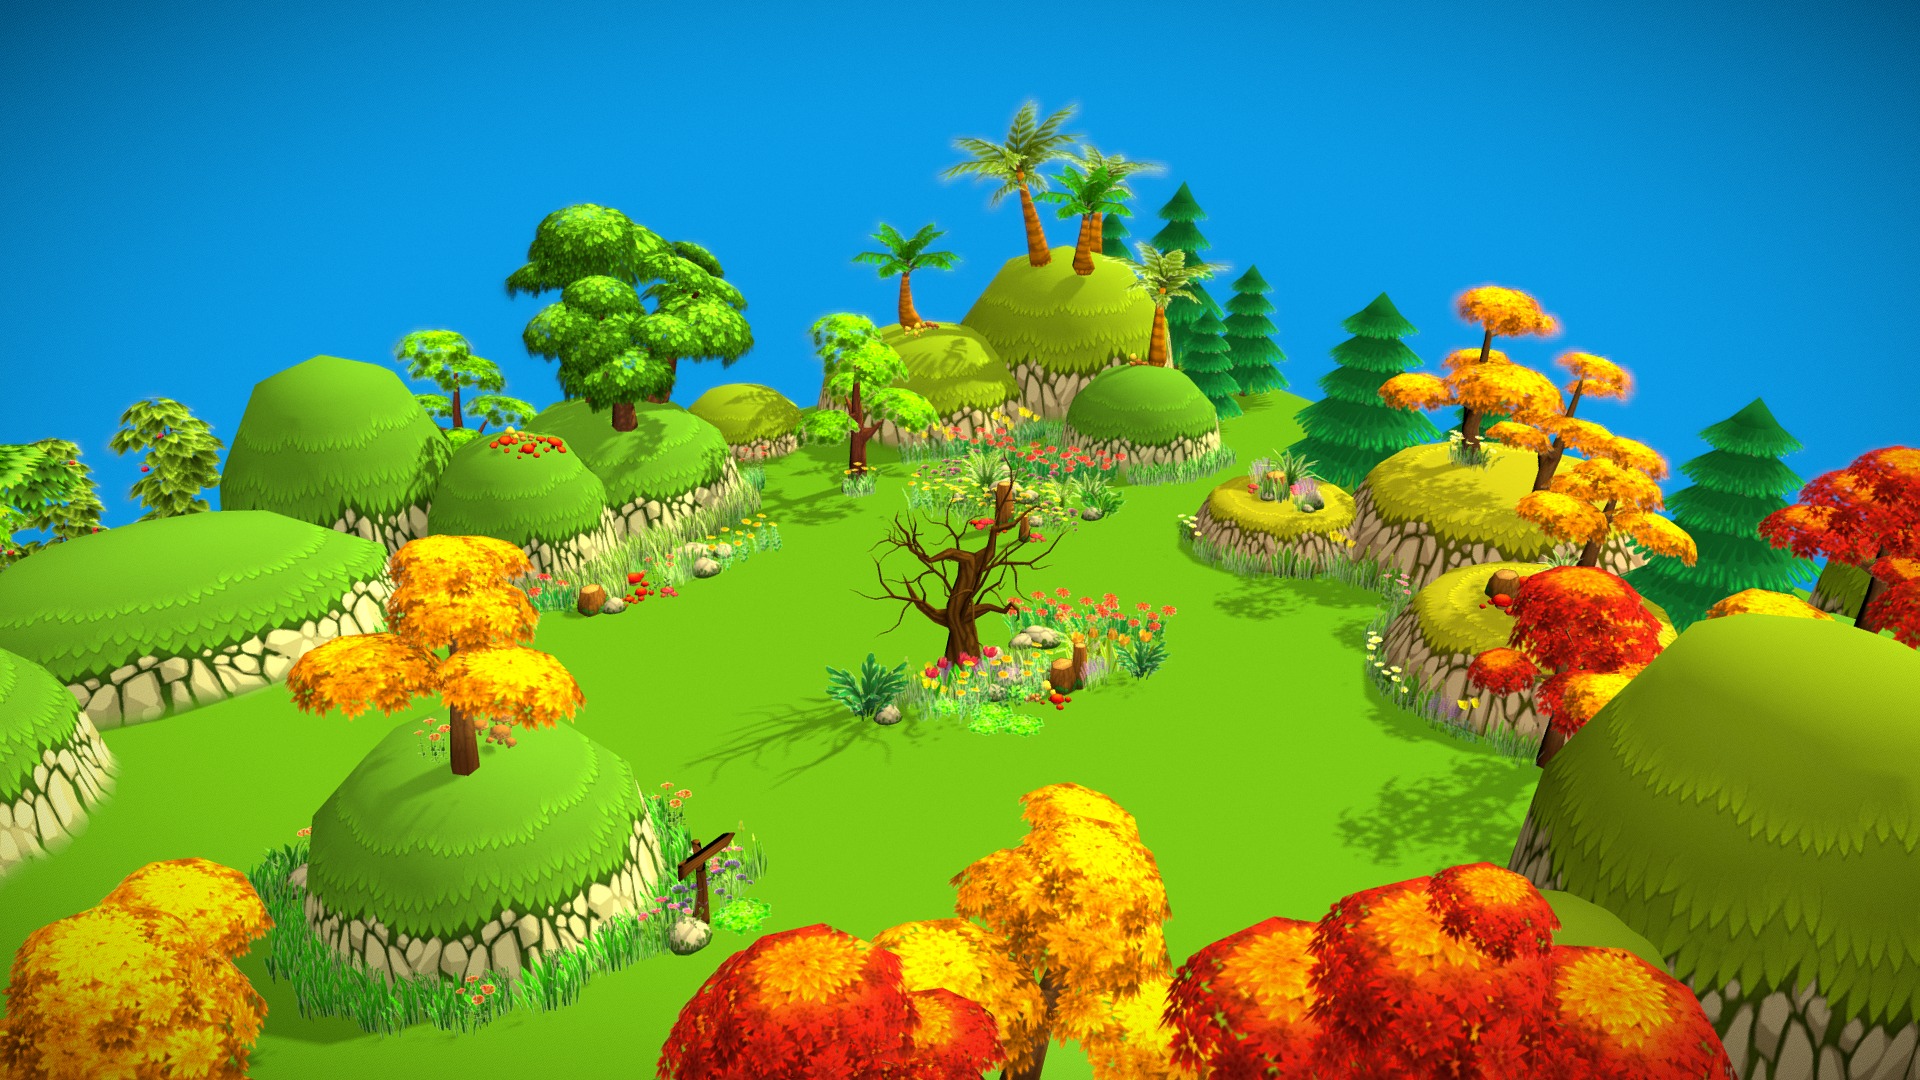 -link removed-

This pack comes with trees, mushrooms, grass, shrubs and bushes, flowers, hills and a tiling water stream&hellip; All you need to build a whimsical, cartoony looking forest. All models have low tris counts and texture map limited at 512x512 and 256x256. 

It's easy to create natural environments on your own using over 60 various plants in this pack 3d model